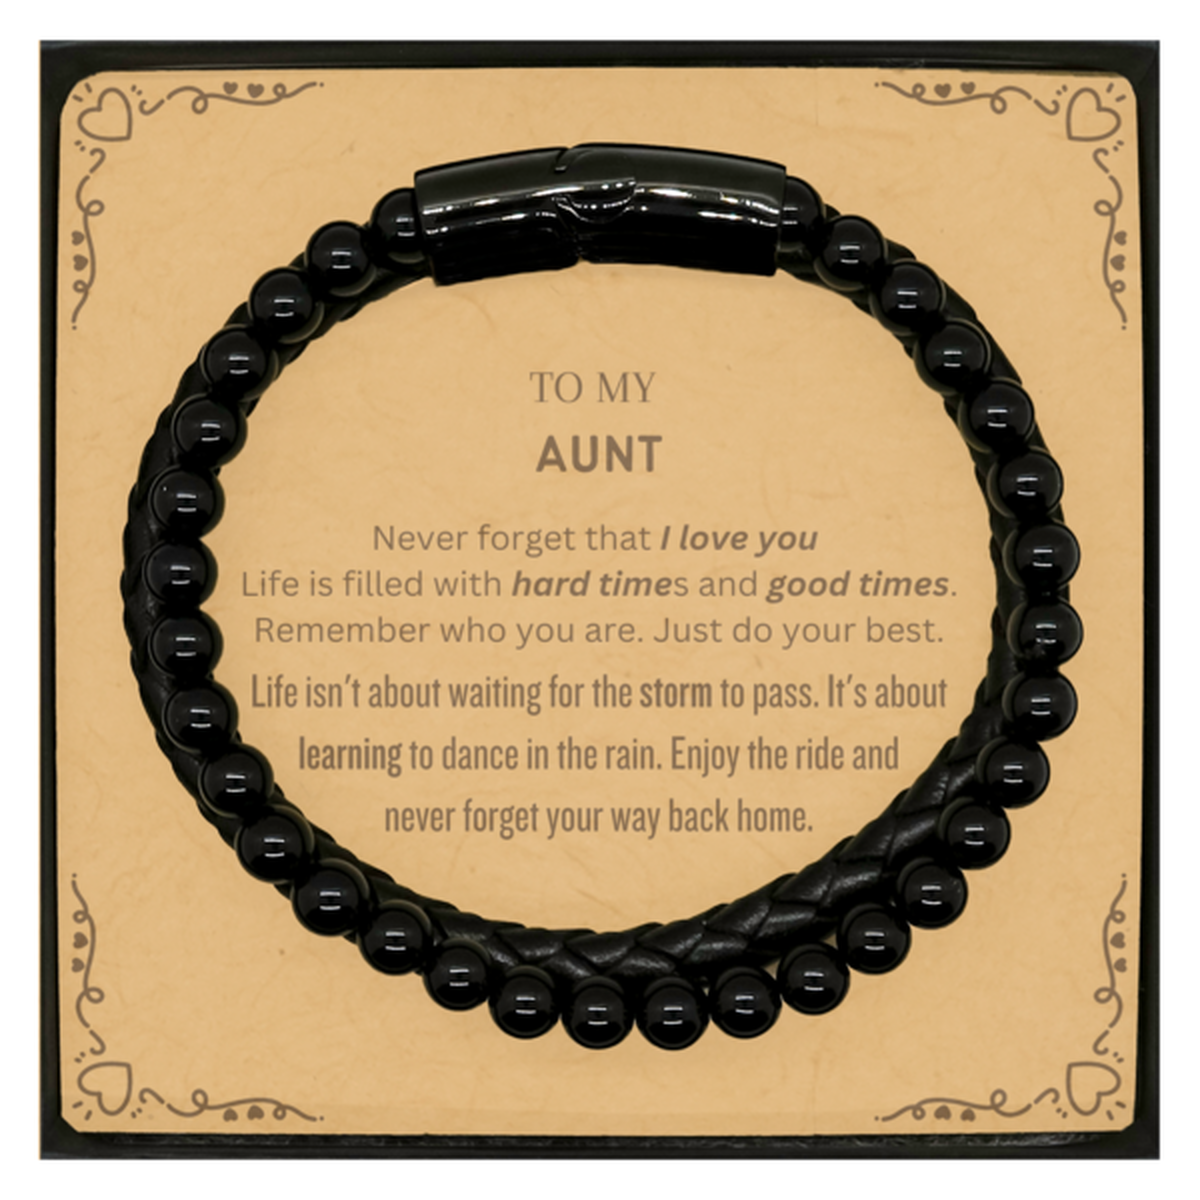 Christmas Aunt Stone Leather Bracelets Gifts, To My Aunt Birthday Thank You Gifts For Aunt, Graduation Unique Gifts For Aunt To My Aunt Never forget that I love you life is filled with hard times and good times. Remember who you are. Just do your best